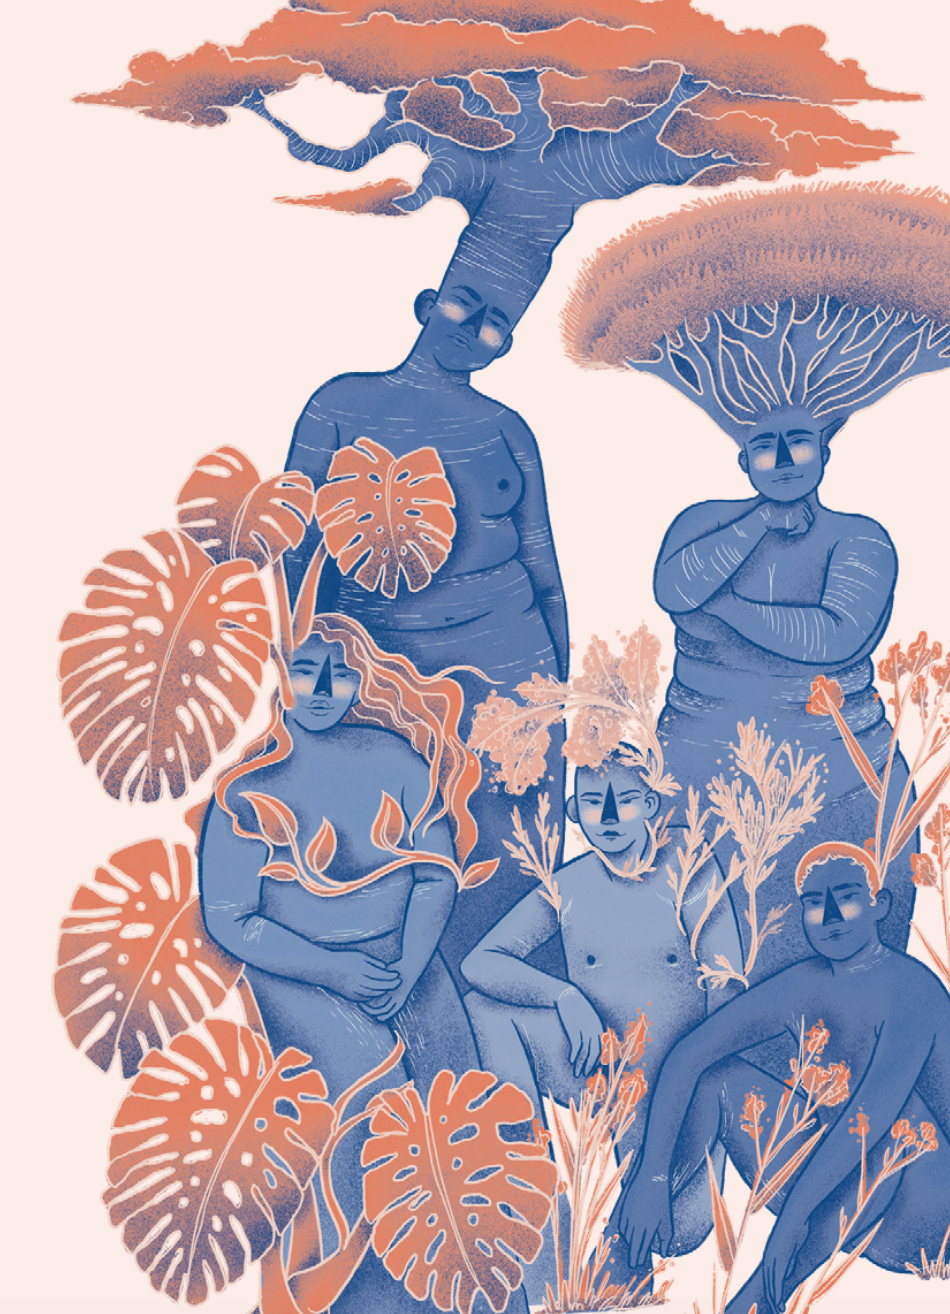 A floral illustration with bodies of women and non-binary peoples.